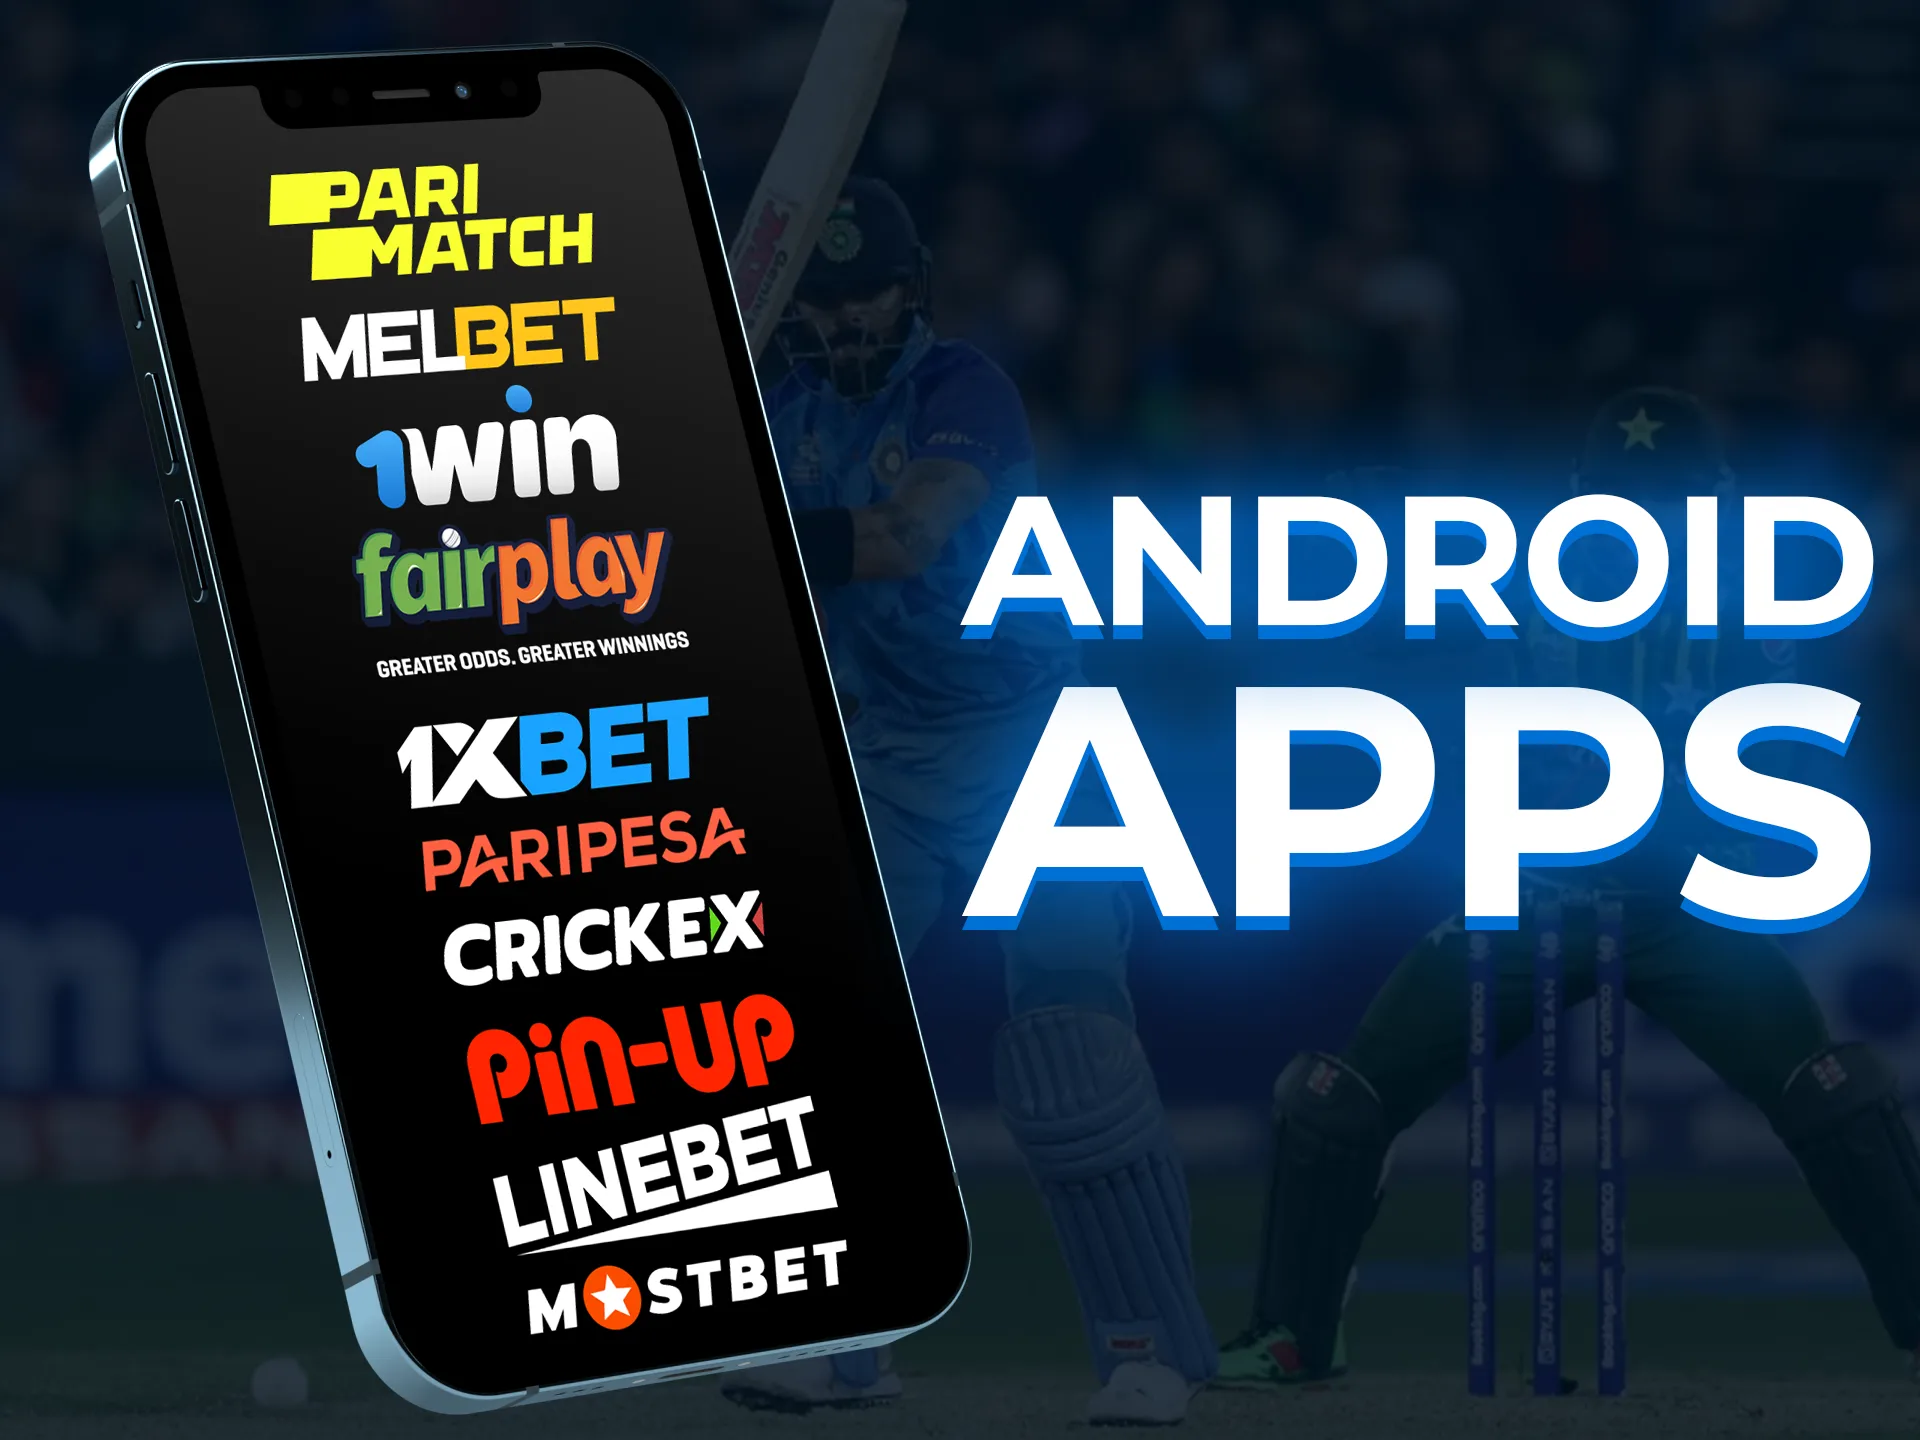 You can download the cricket betting app only on the bookmaker's official website.